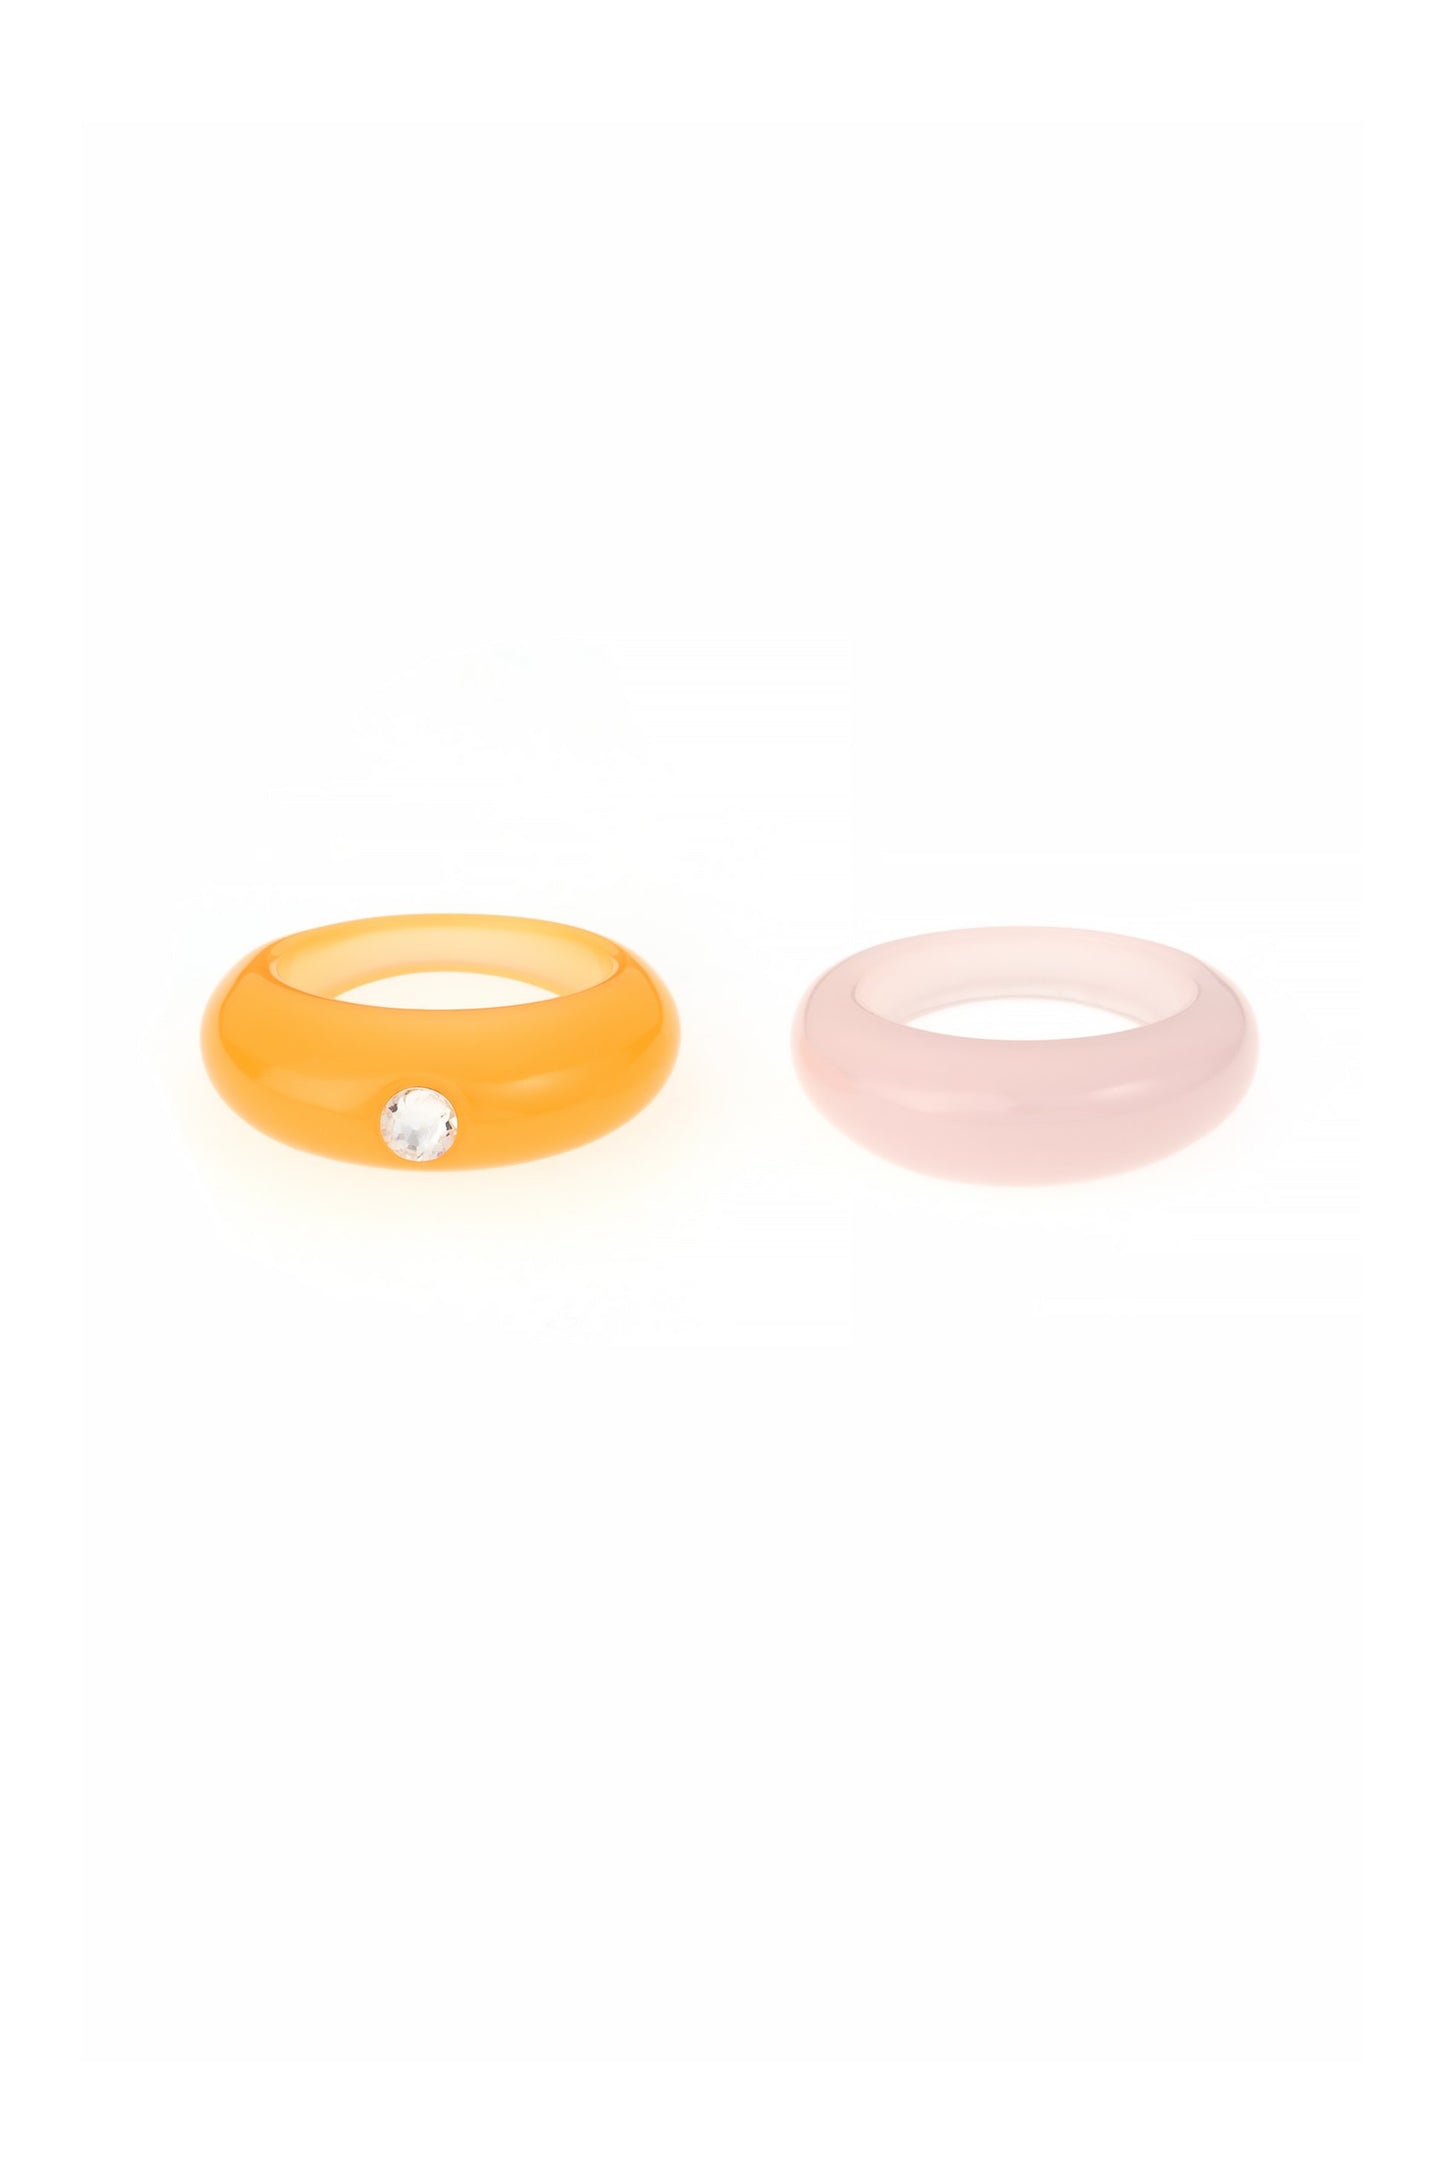 Creamsicle and Puff Pink Resin Ring Set on white background